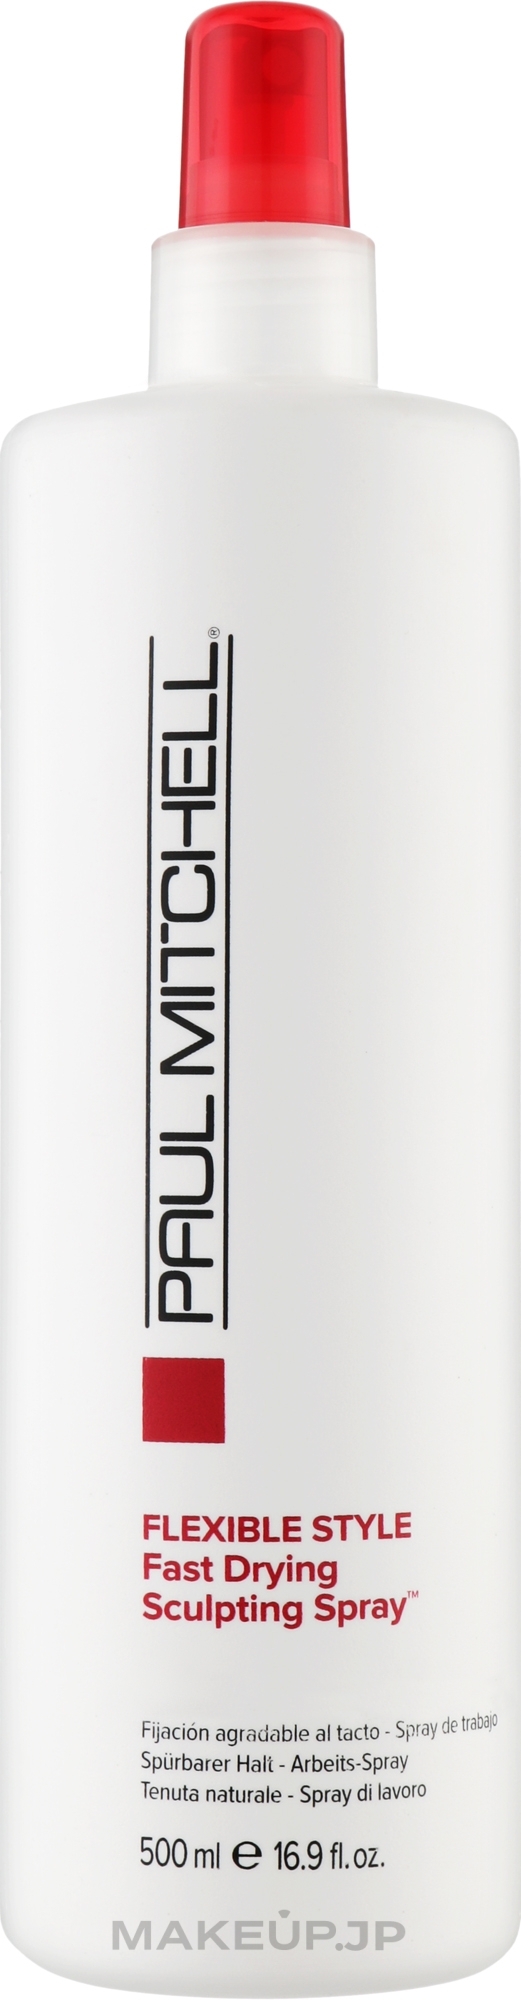 Fast Drying Sculpting Spray - Paul Mitchell Flexible Style Fast Drying Sculpting Spray — photo 500 ml